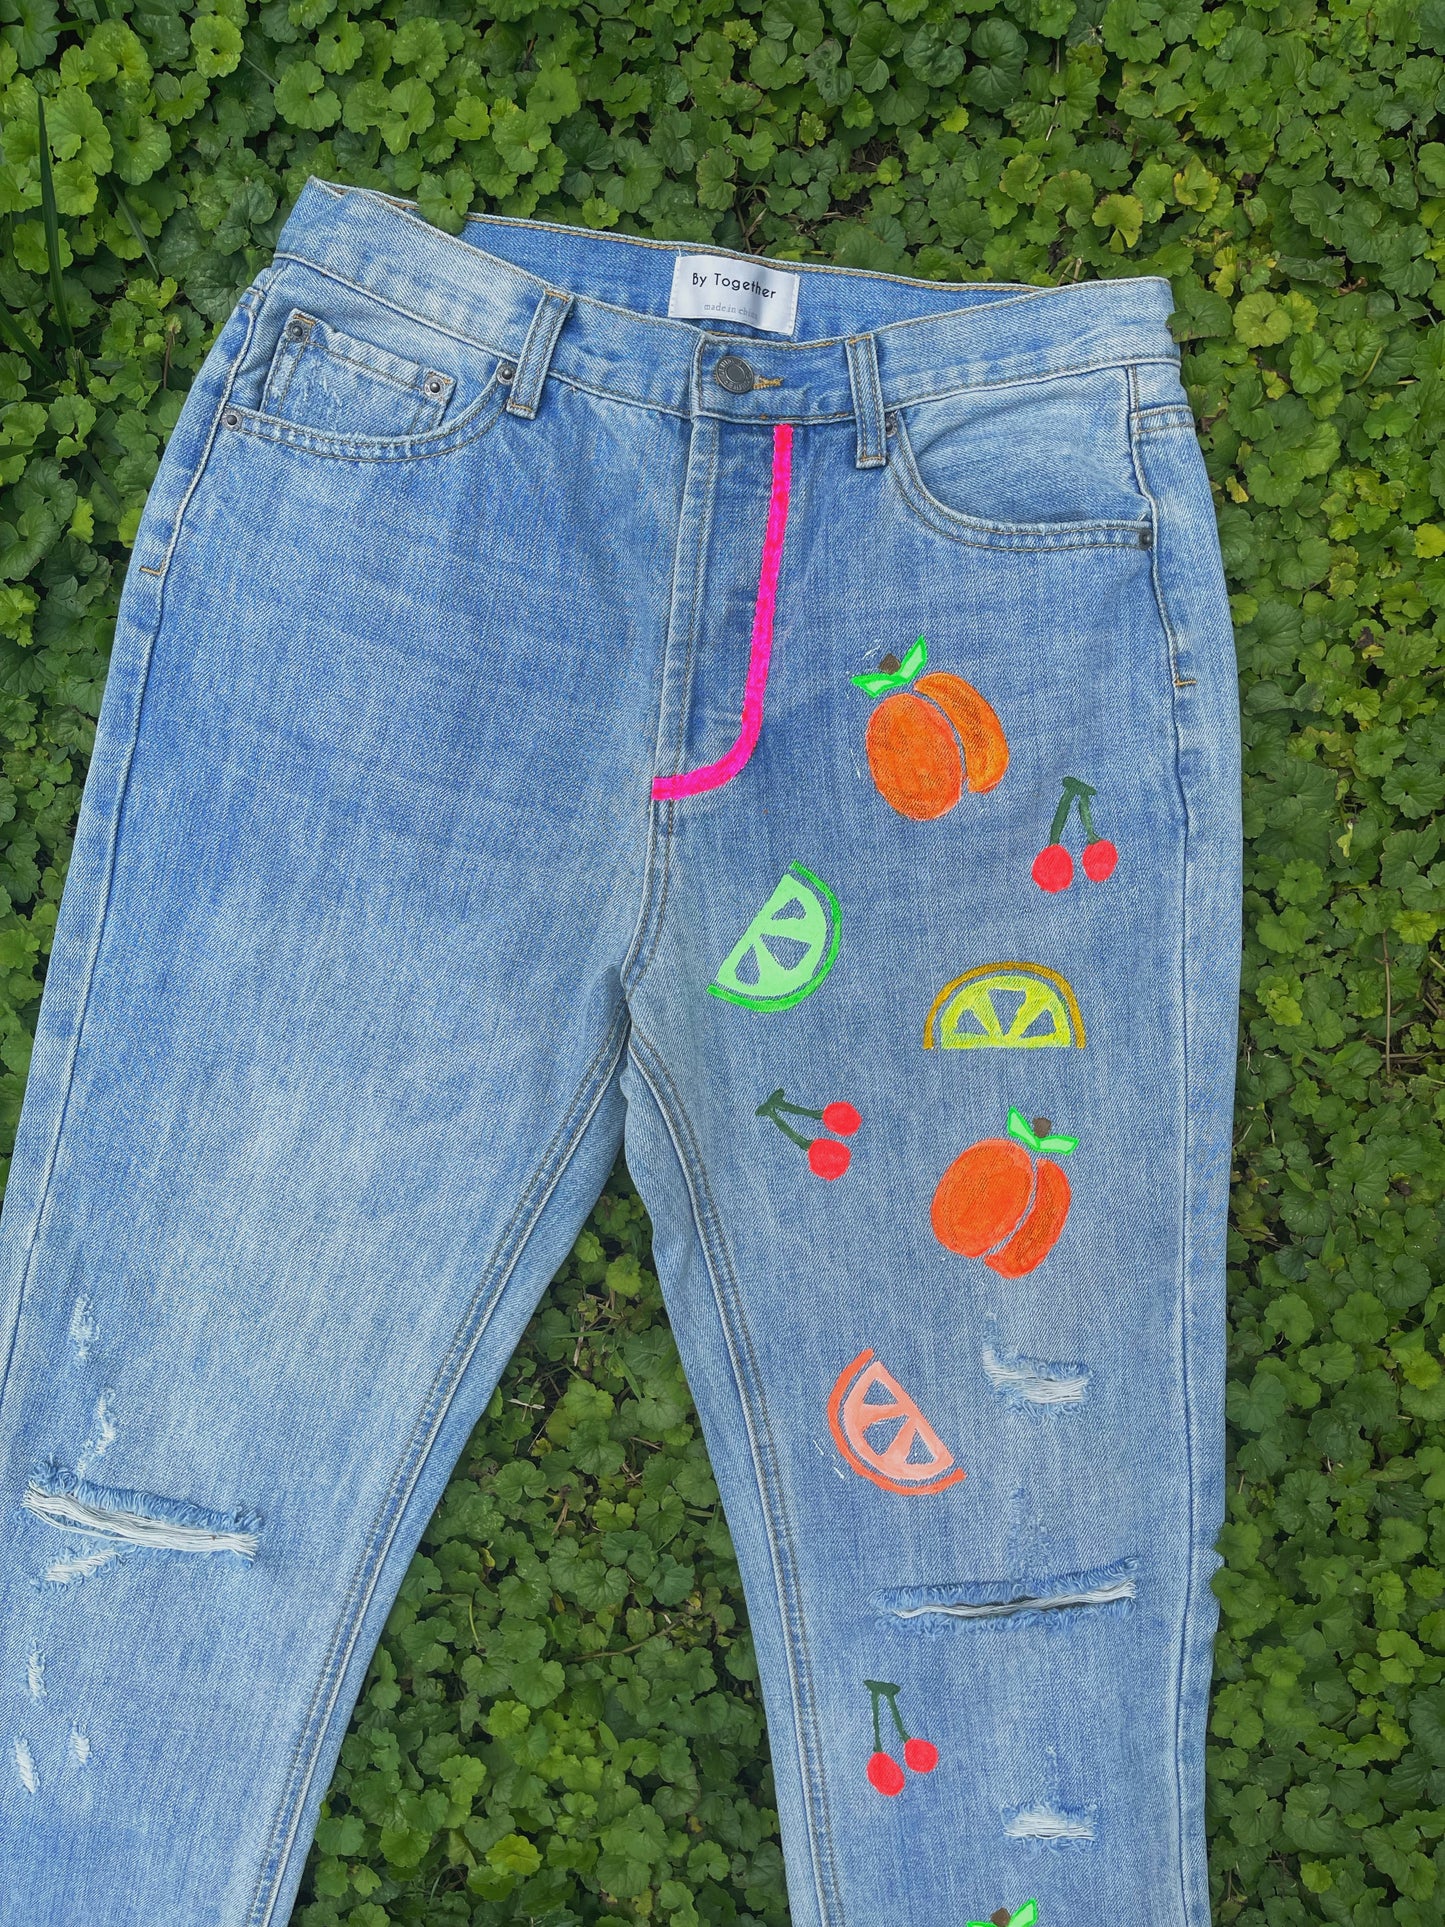 SEND IN YOUR DENIM | Surprise PAINTED Jeans